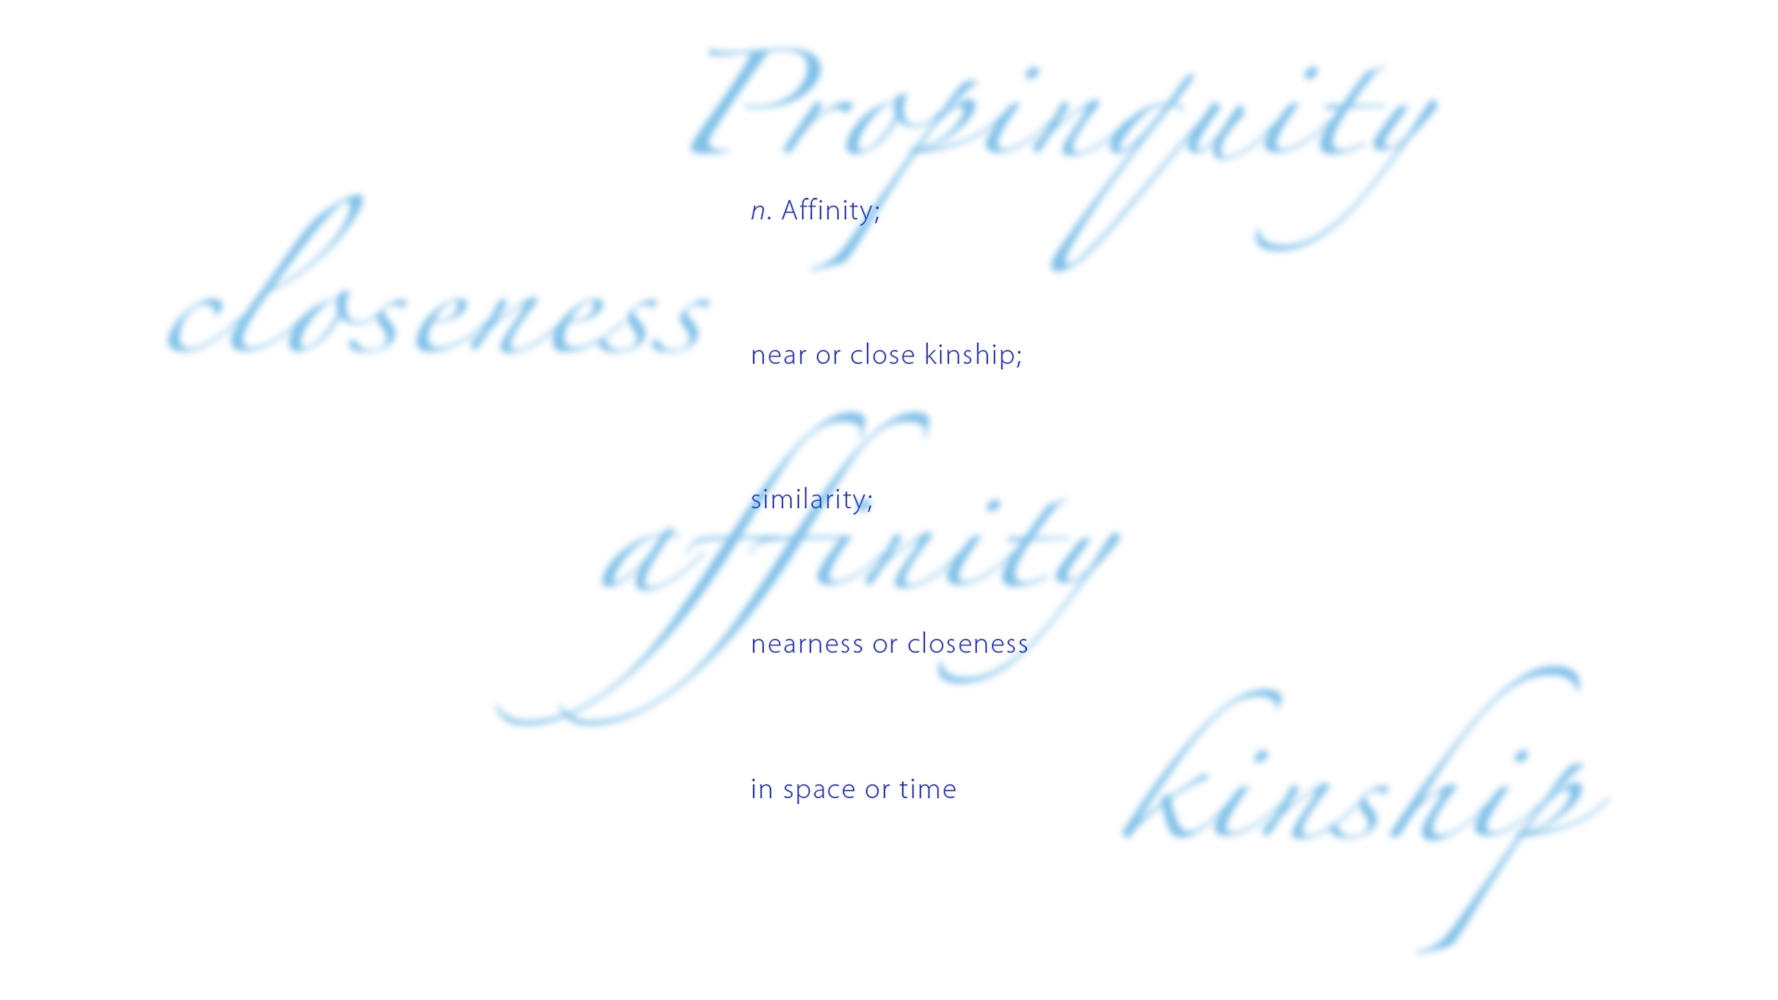 Affinity; near or close kinship; similarity; nearness or closeness; in space or time